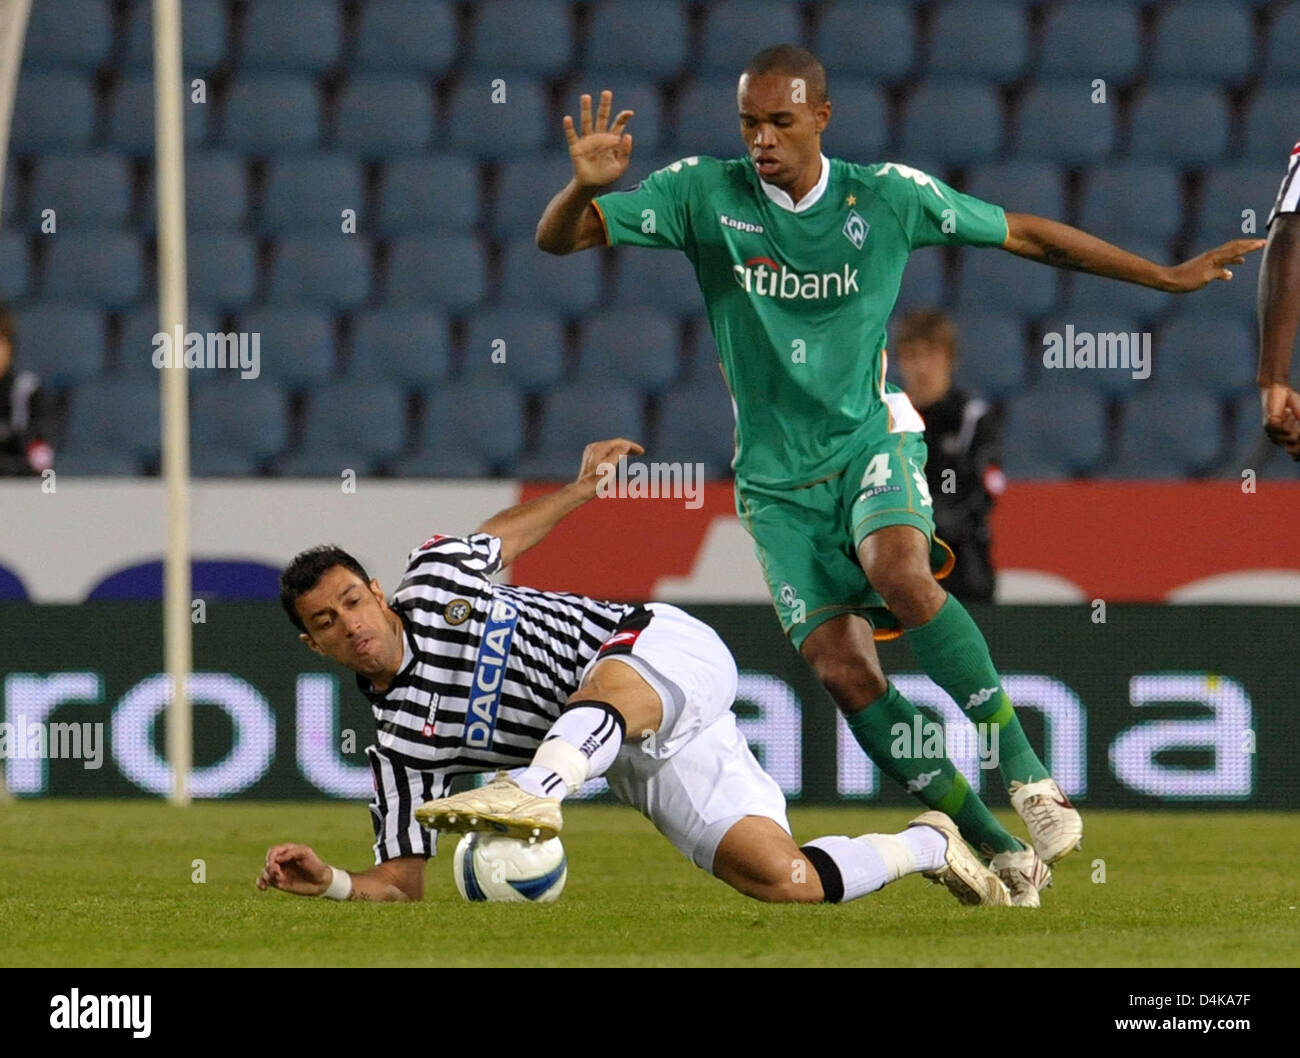 Bremen?s Naldo (R) vies for the ball with Udinese?s Fabio Quagliarella during the UEFA Cup quarter finals second leg match Udinese vs Werder Bremen at Stadio Friuli in Udine, Italy, 16 April 2009. The match tied 3-3. Photo: Carmen Jaspersen Stock Photo